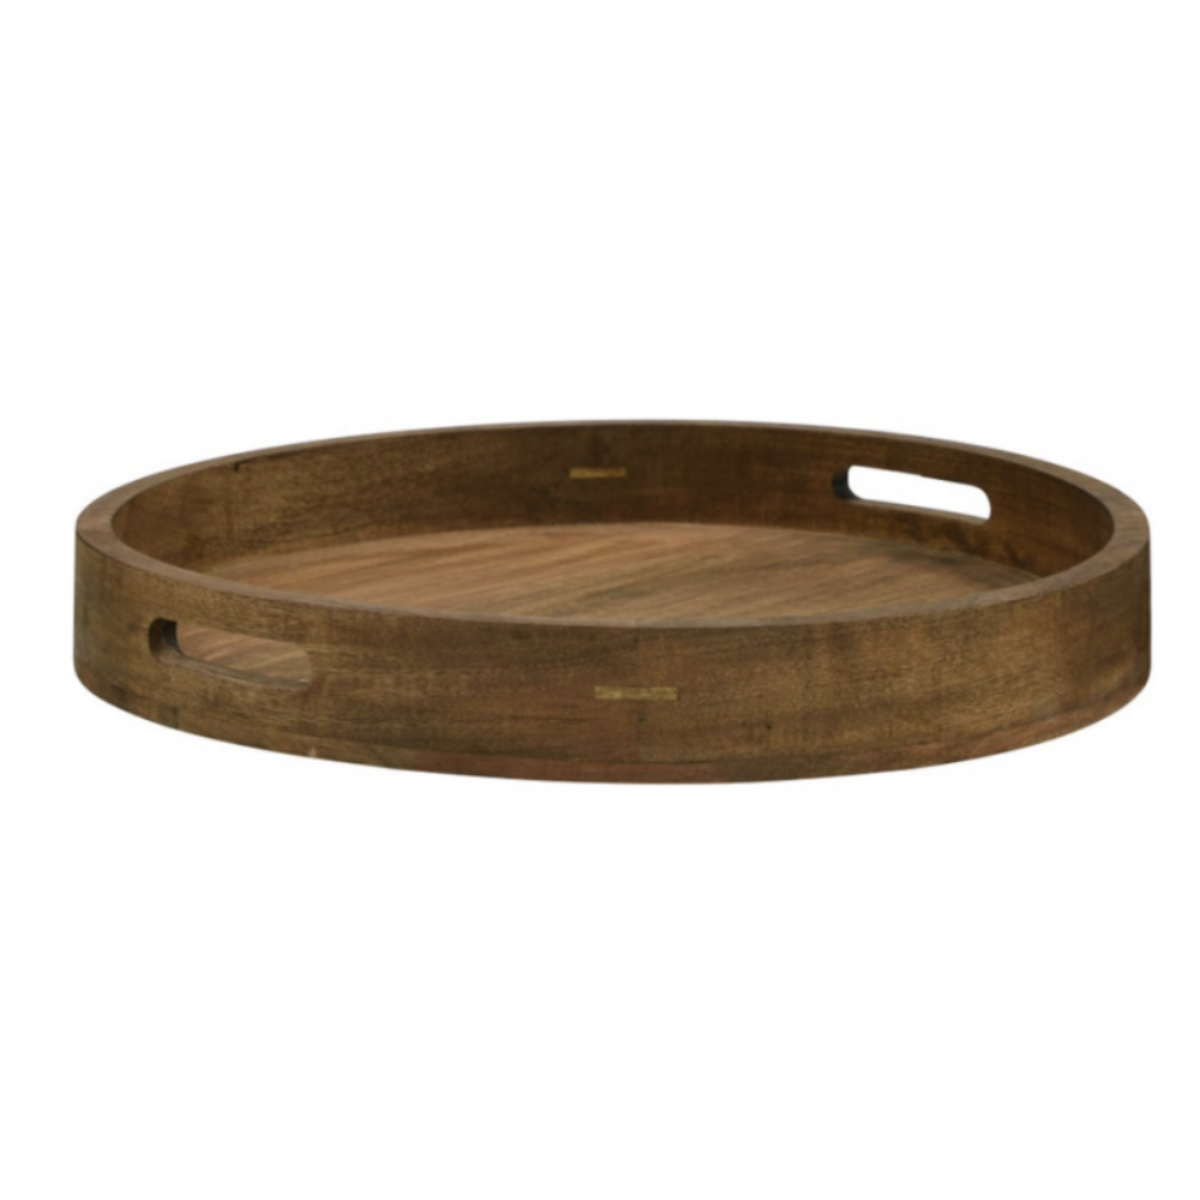 Wooden tray - 2 sizes